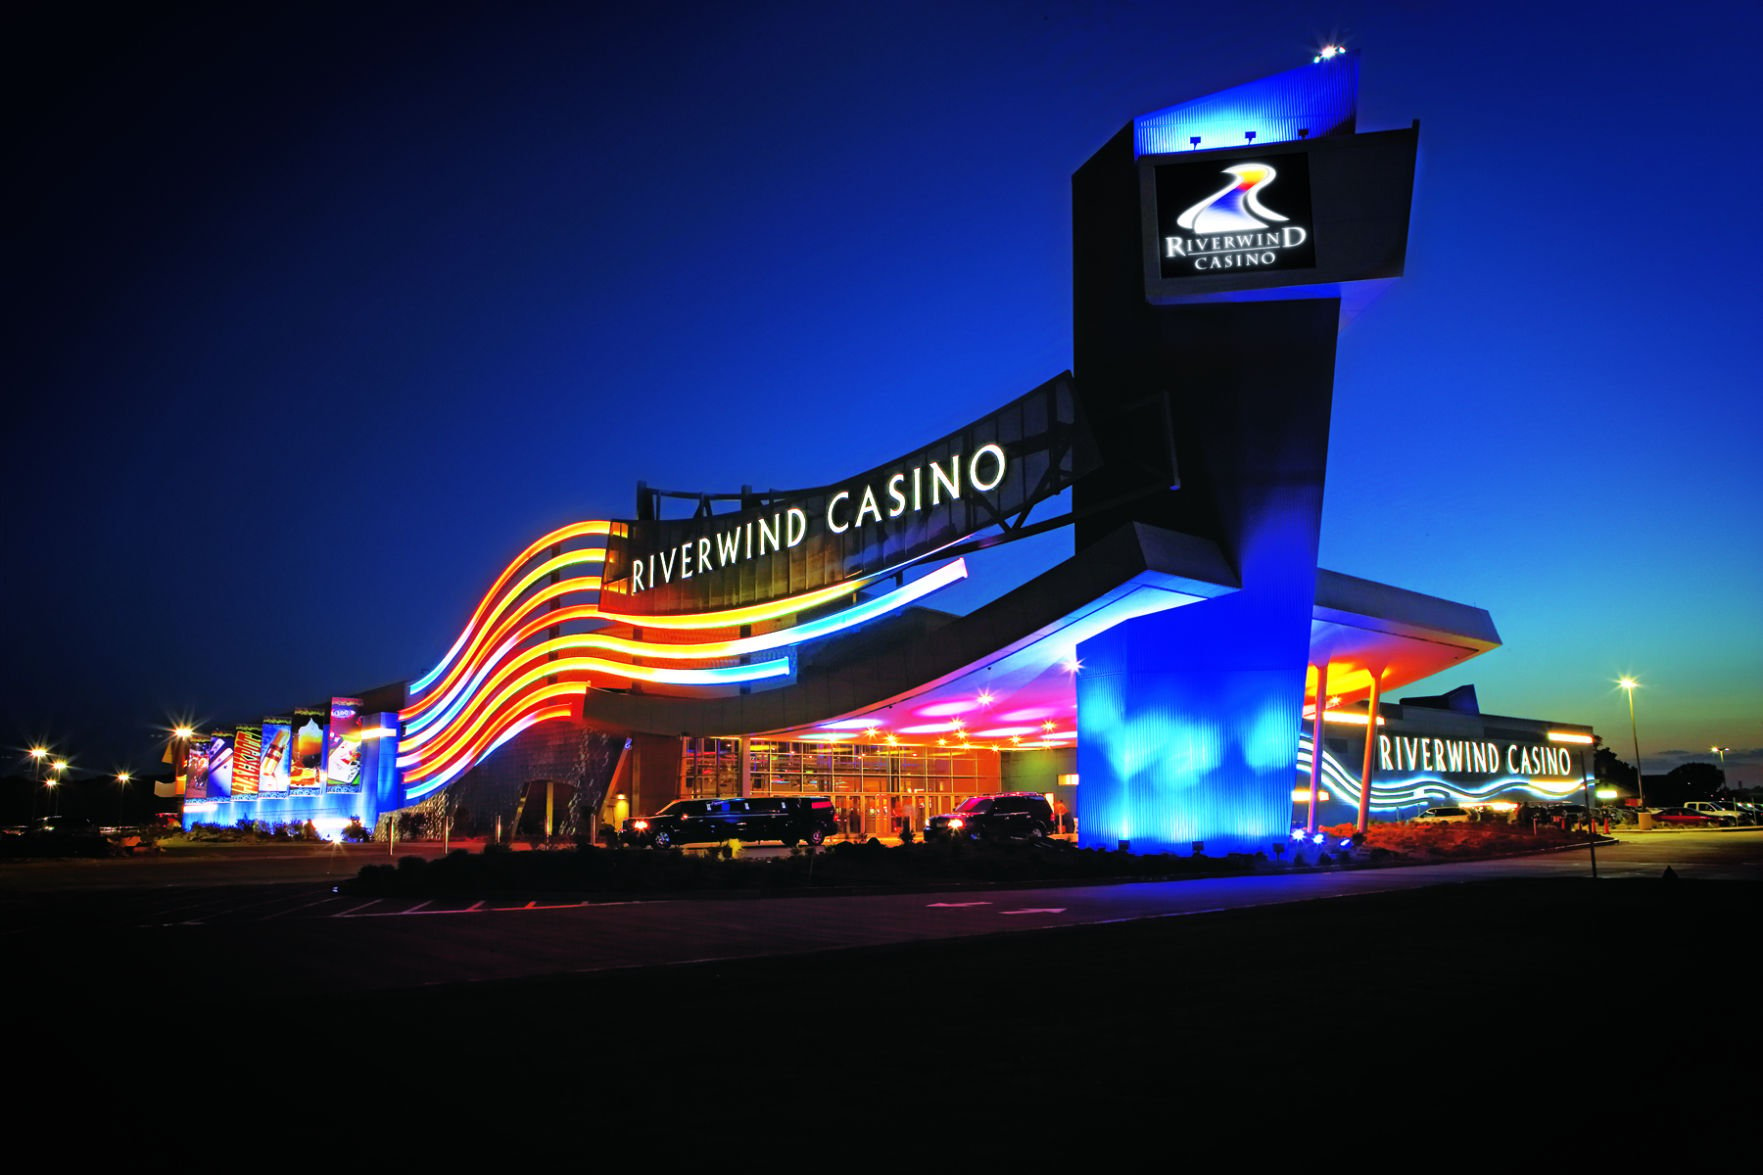 is turning stone casino open on christmas